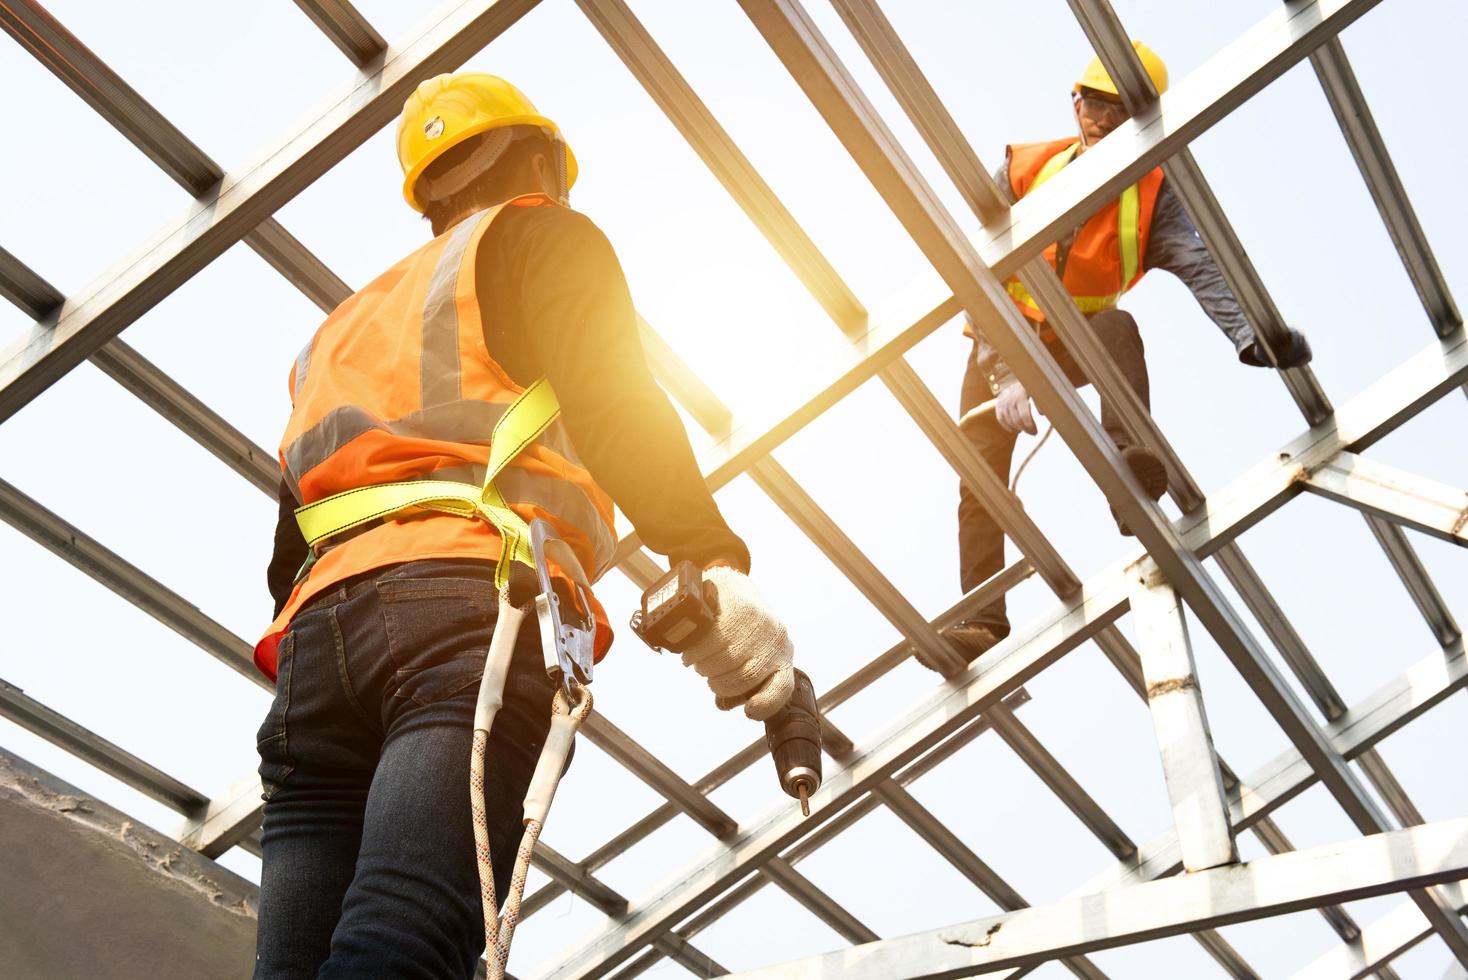 https://static.vecteezy.com/system/resources/previews/010/508/086/non_2x/construction-workers-wear-safety-straps-while-working-on-the-building-s-roof-structure-at-a-construction-site-roofer-using-a-pneumatic-nail-gun-free-photo.jpg